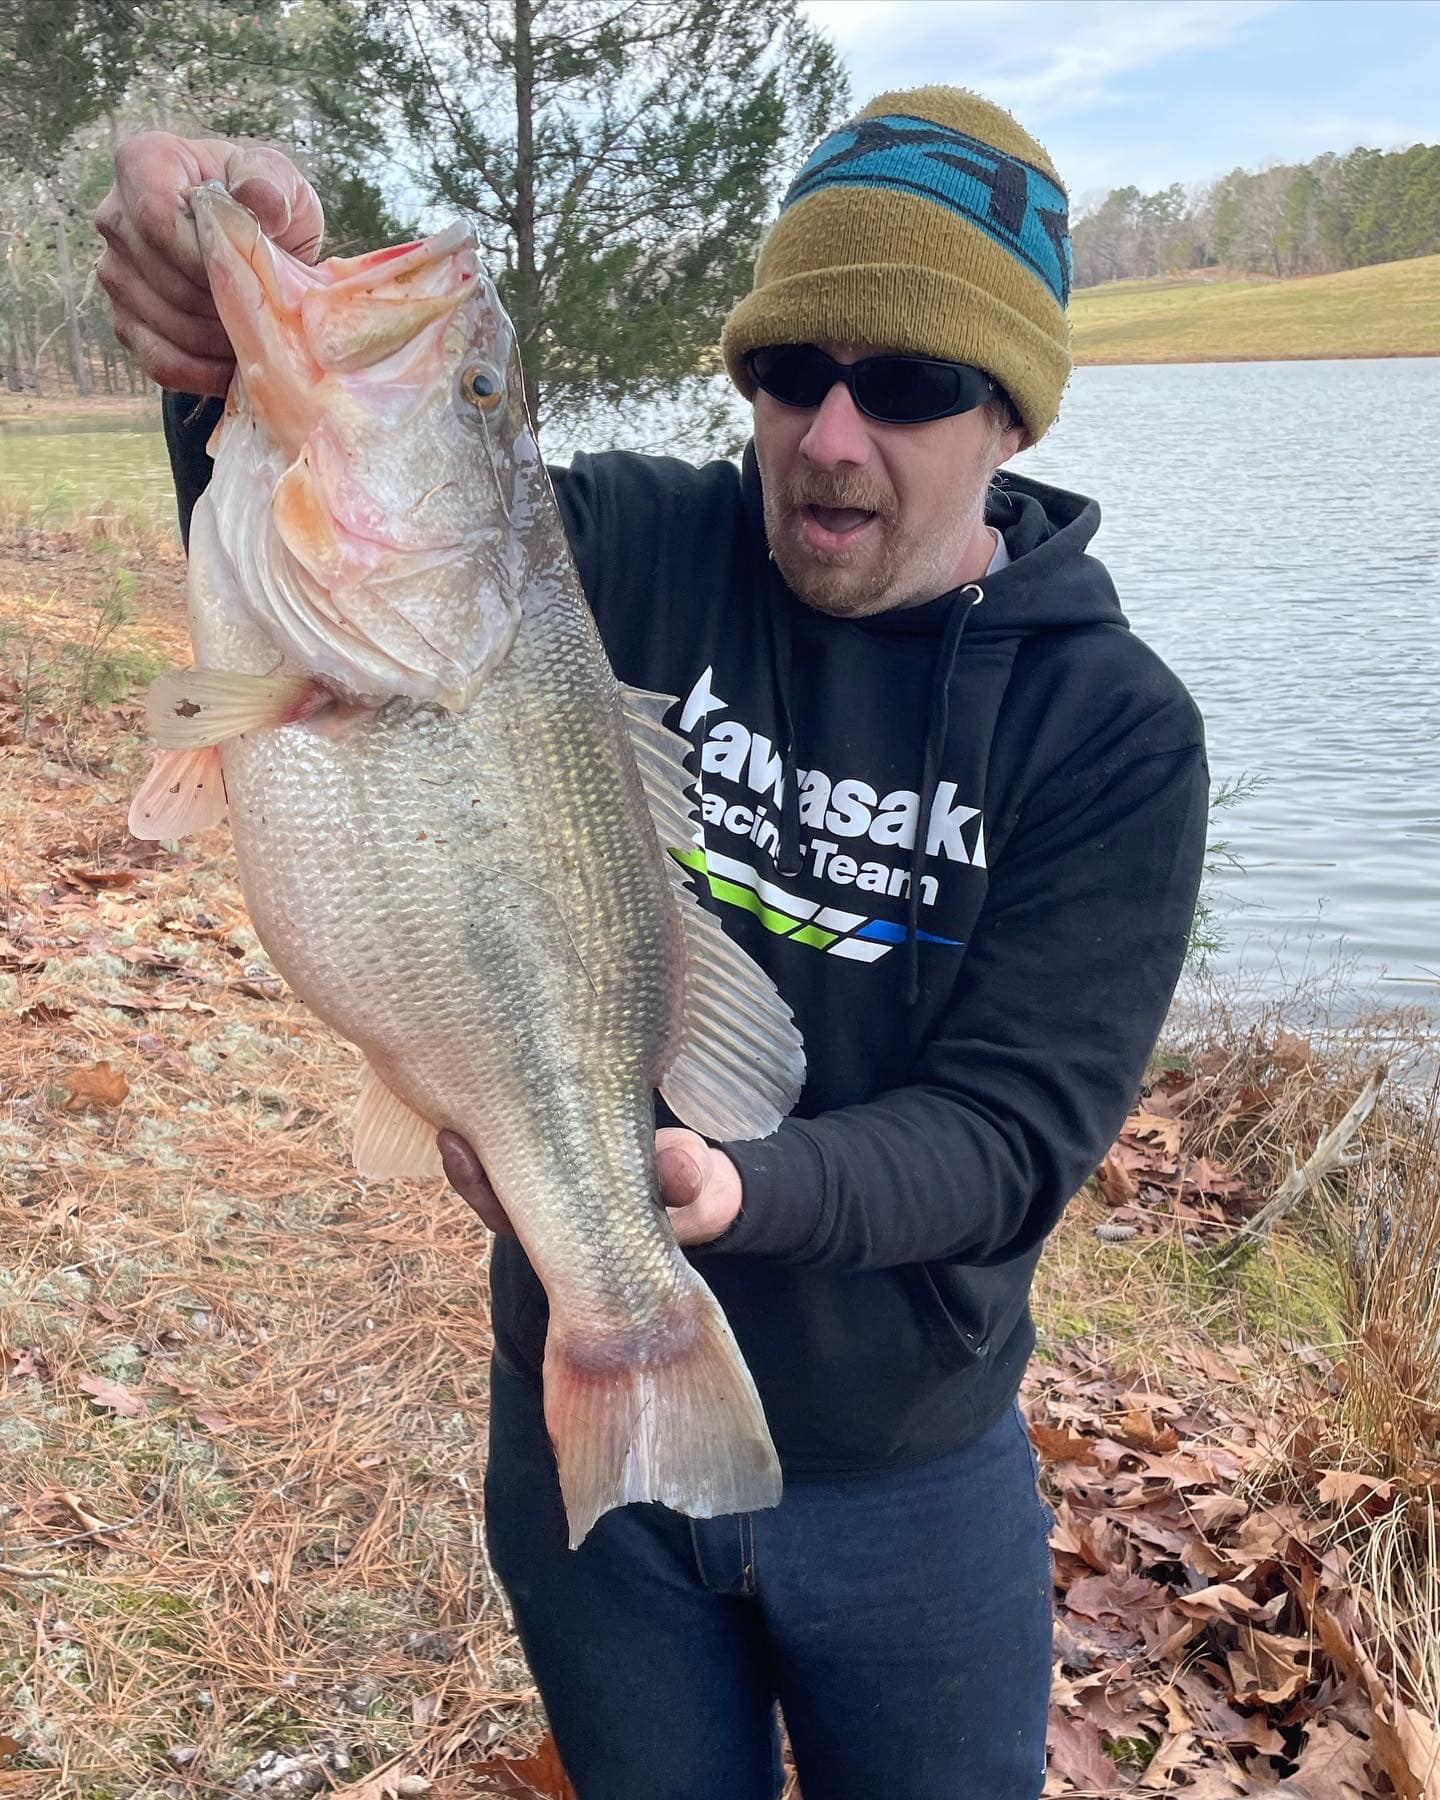 Ian holding a monster 10 lbs bass that he caught using a M450 Lure